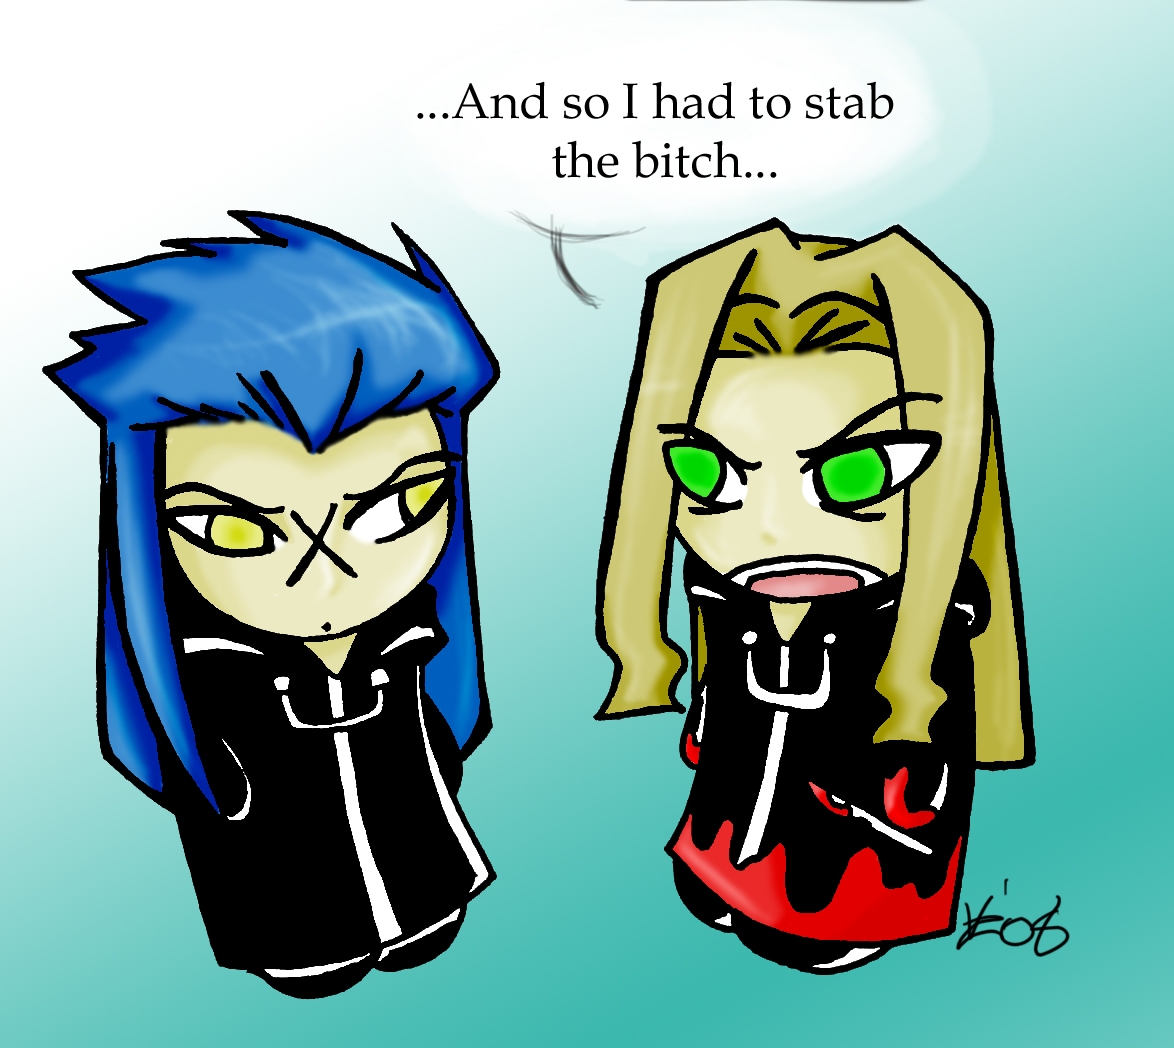 Vexen's story by lildragonboy